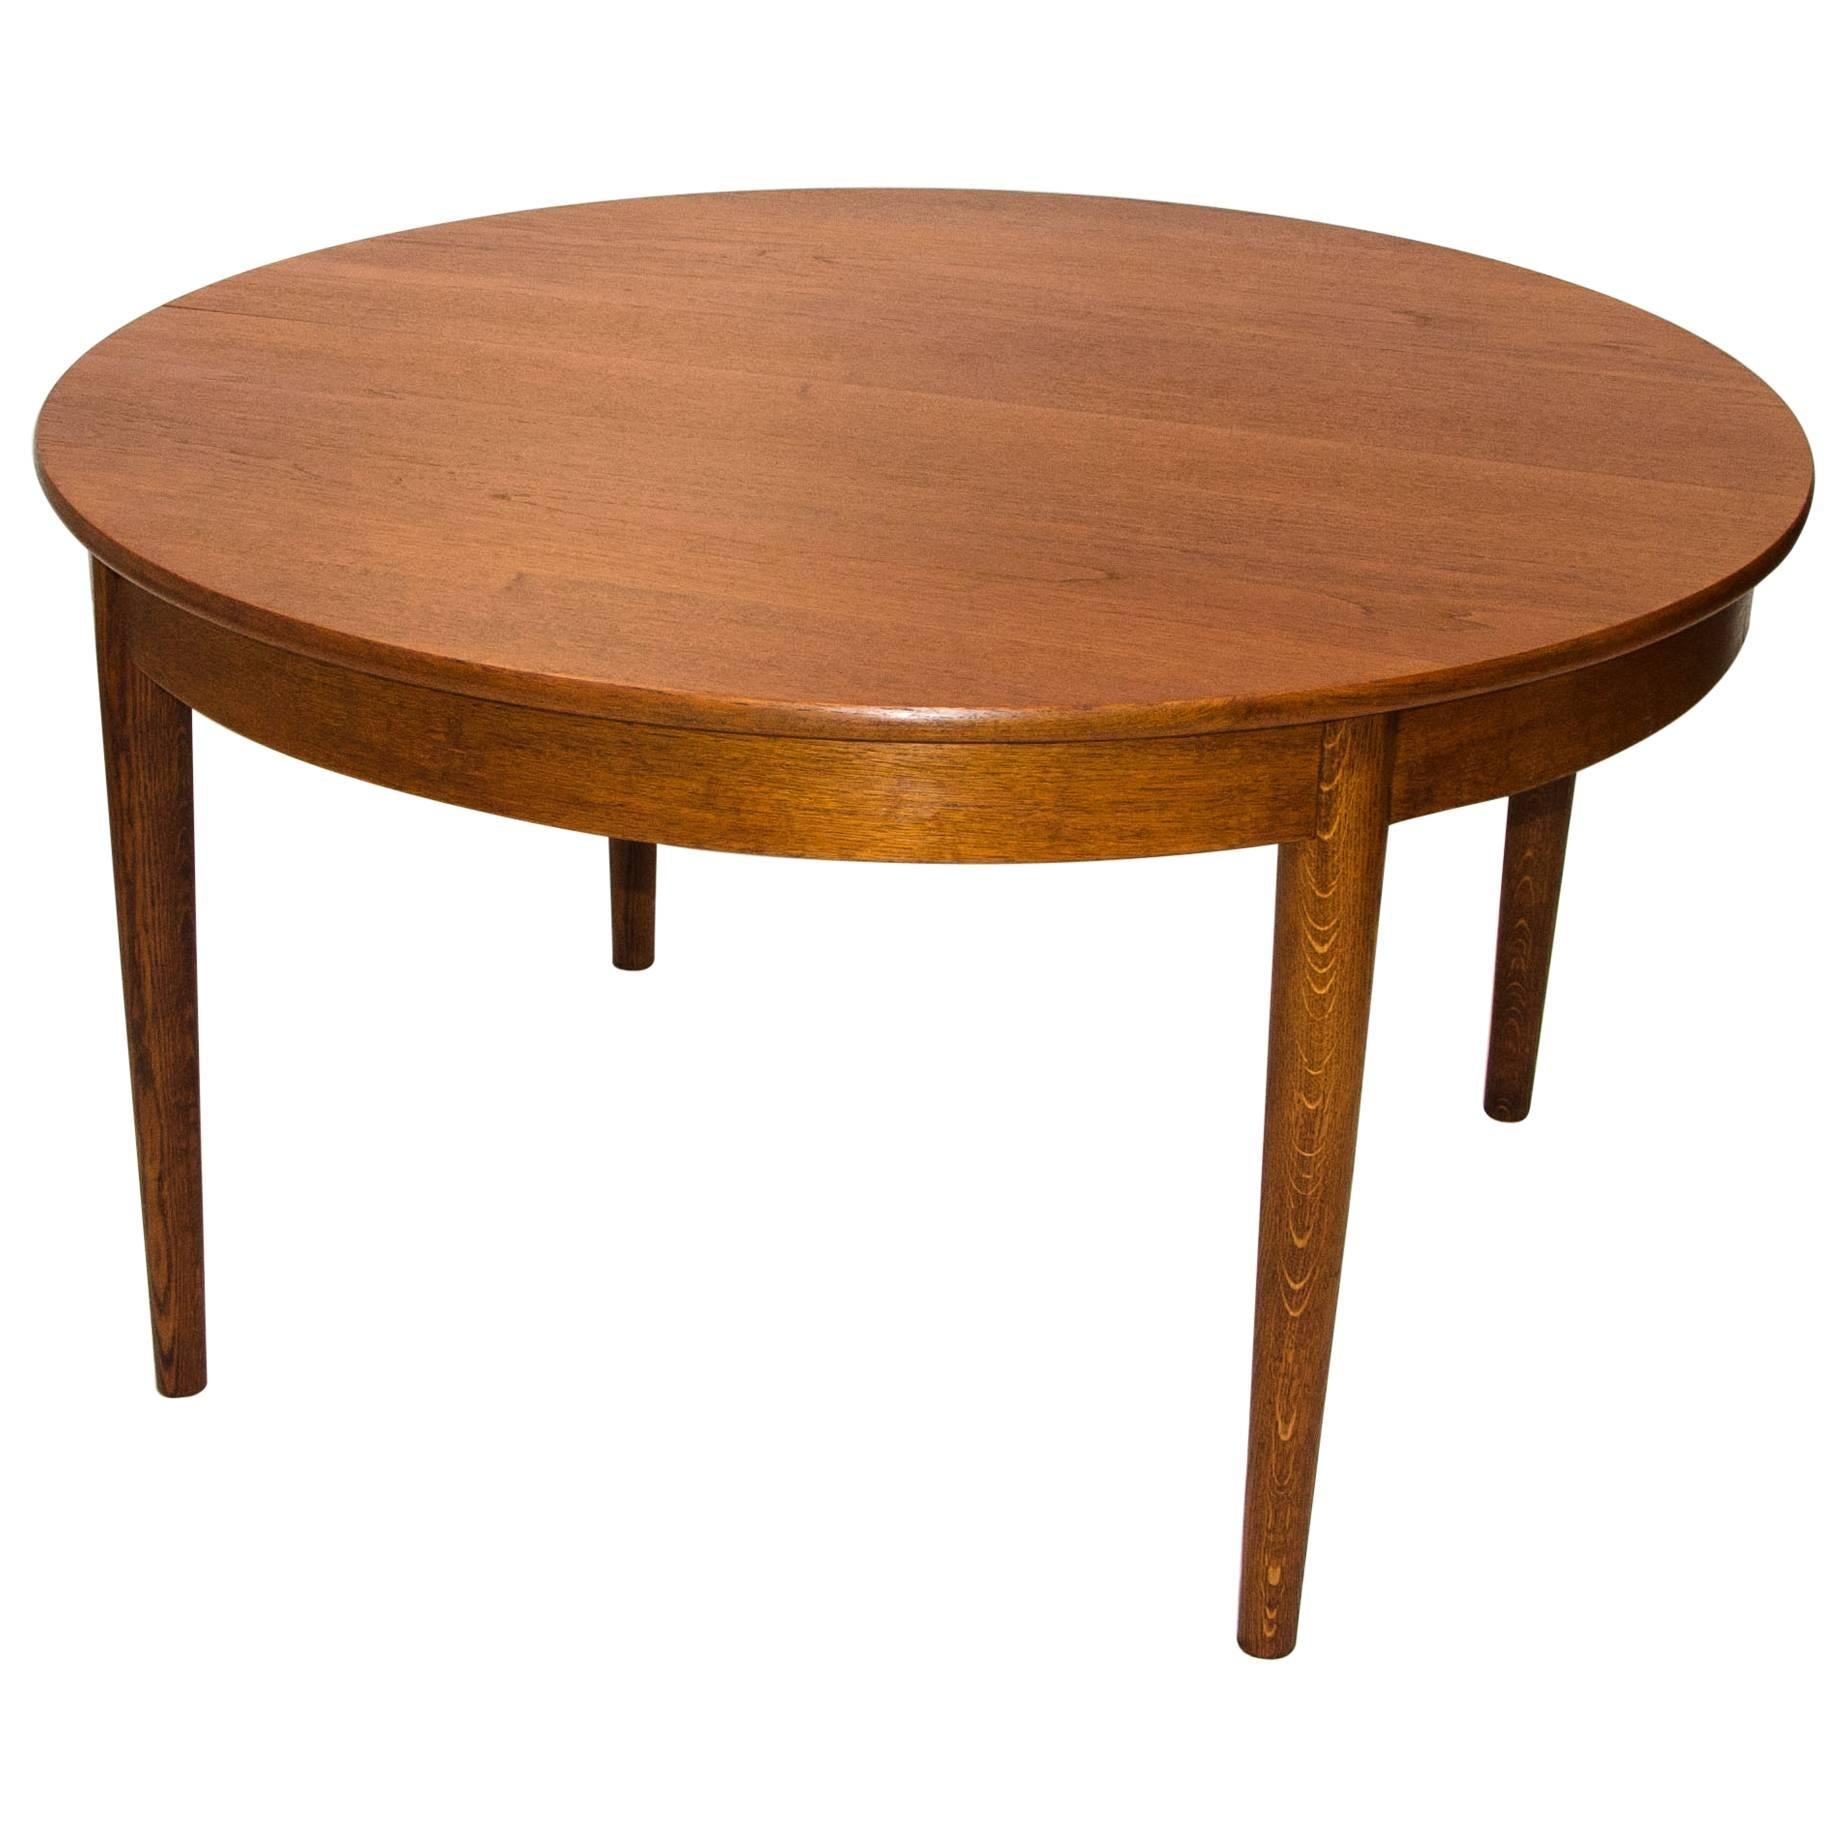 Danish Round Teak Dining Table with Four Skirted Leaves by Johannes Hansen